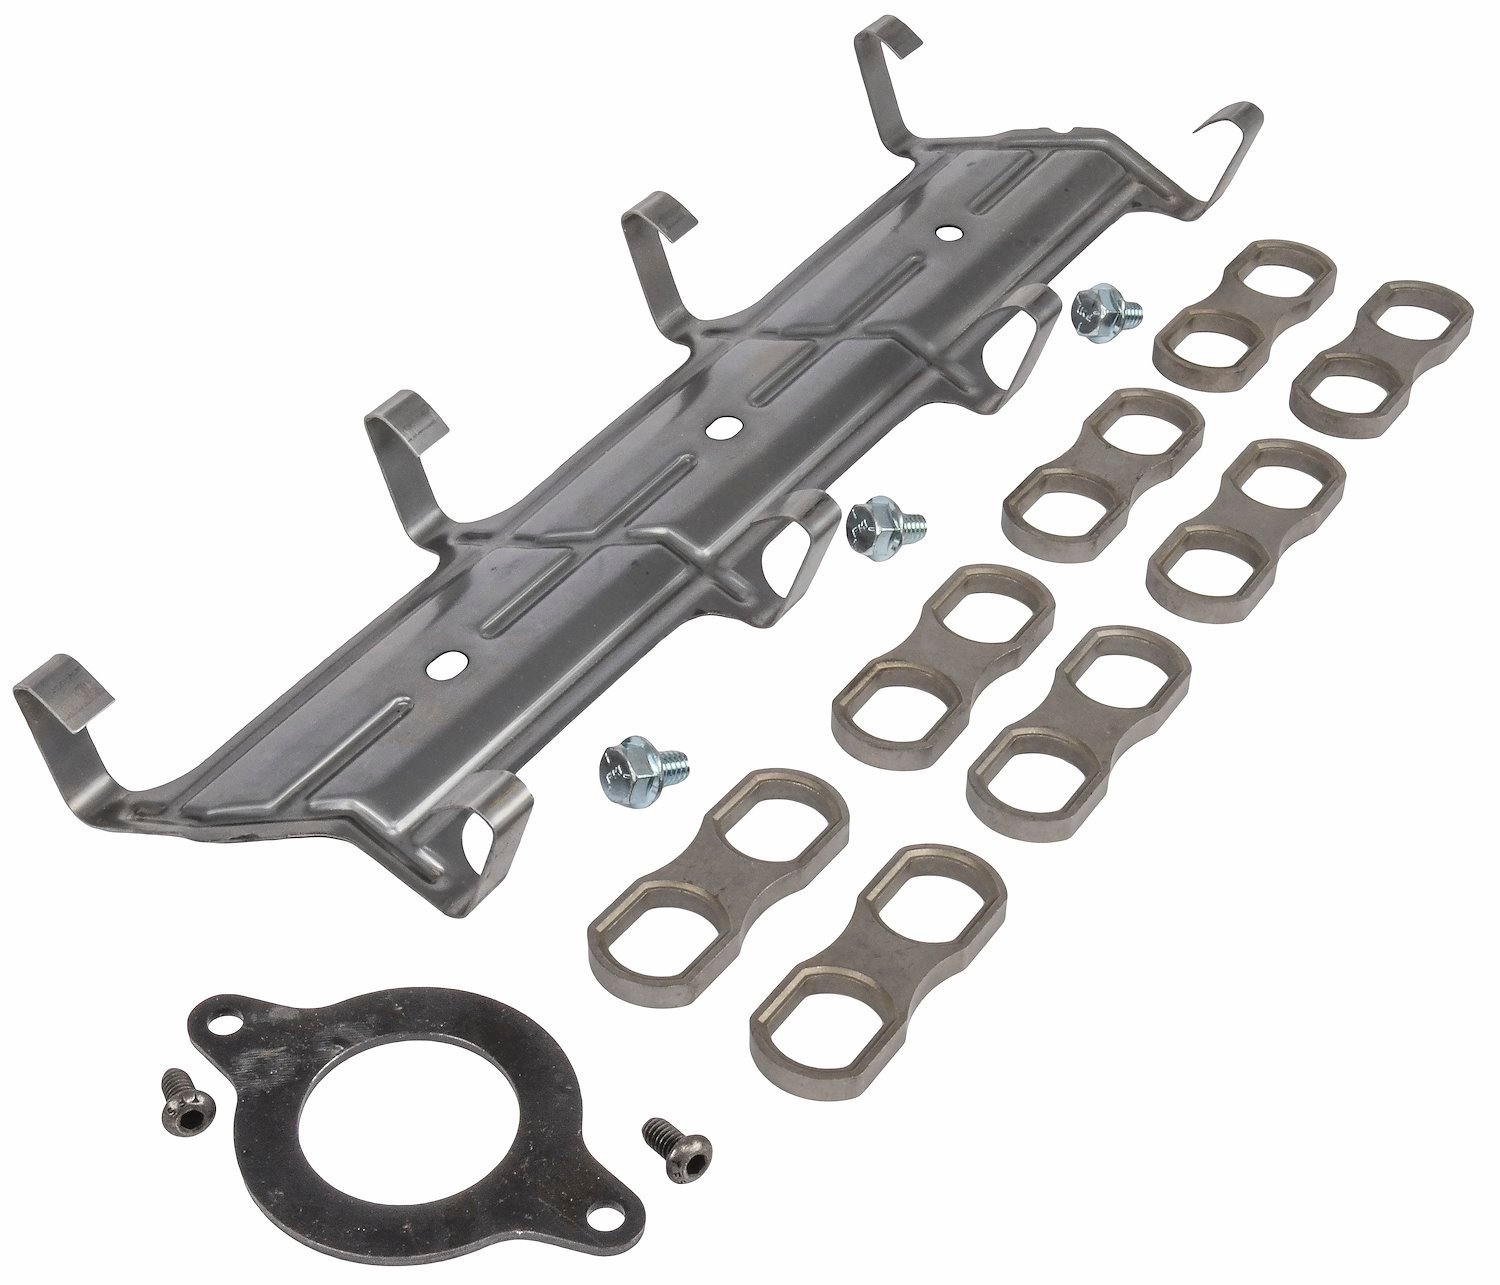 Roller Lifter Retainer Kit for 1991-2002 Small Block Chevy